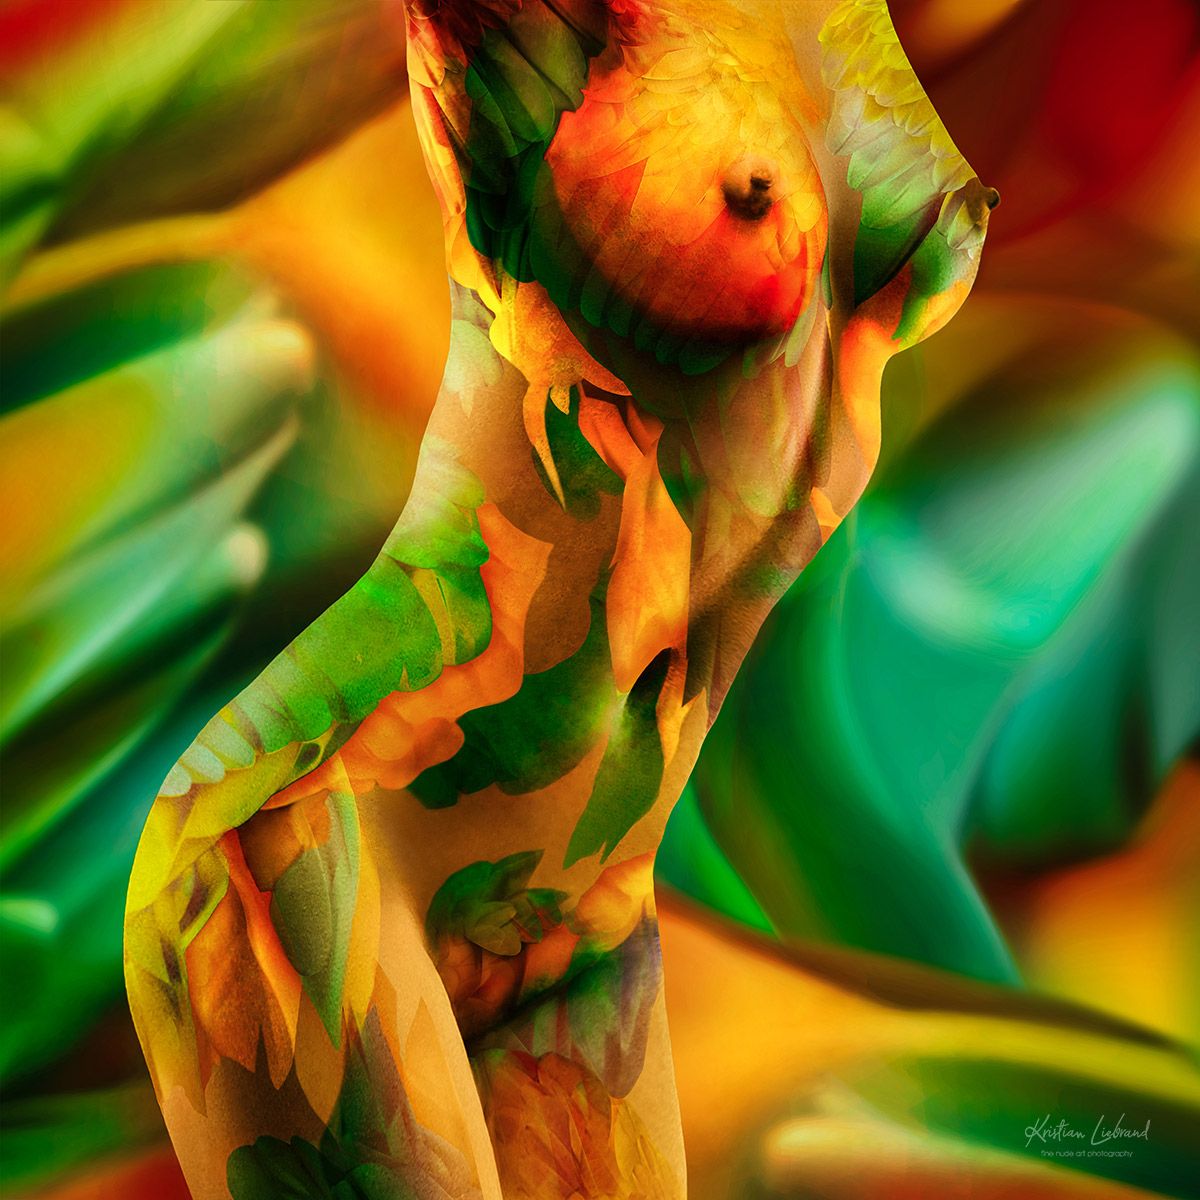 fine nude art, nudes, colors, colorful, paint, paintings, tropical, jungle, girl, nudes, art, bodypaint, body, erotic, beauty, woman, green, orange, naked, breast, female, exotic, Kristian Liebrand